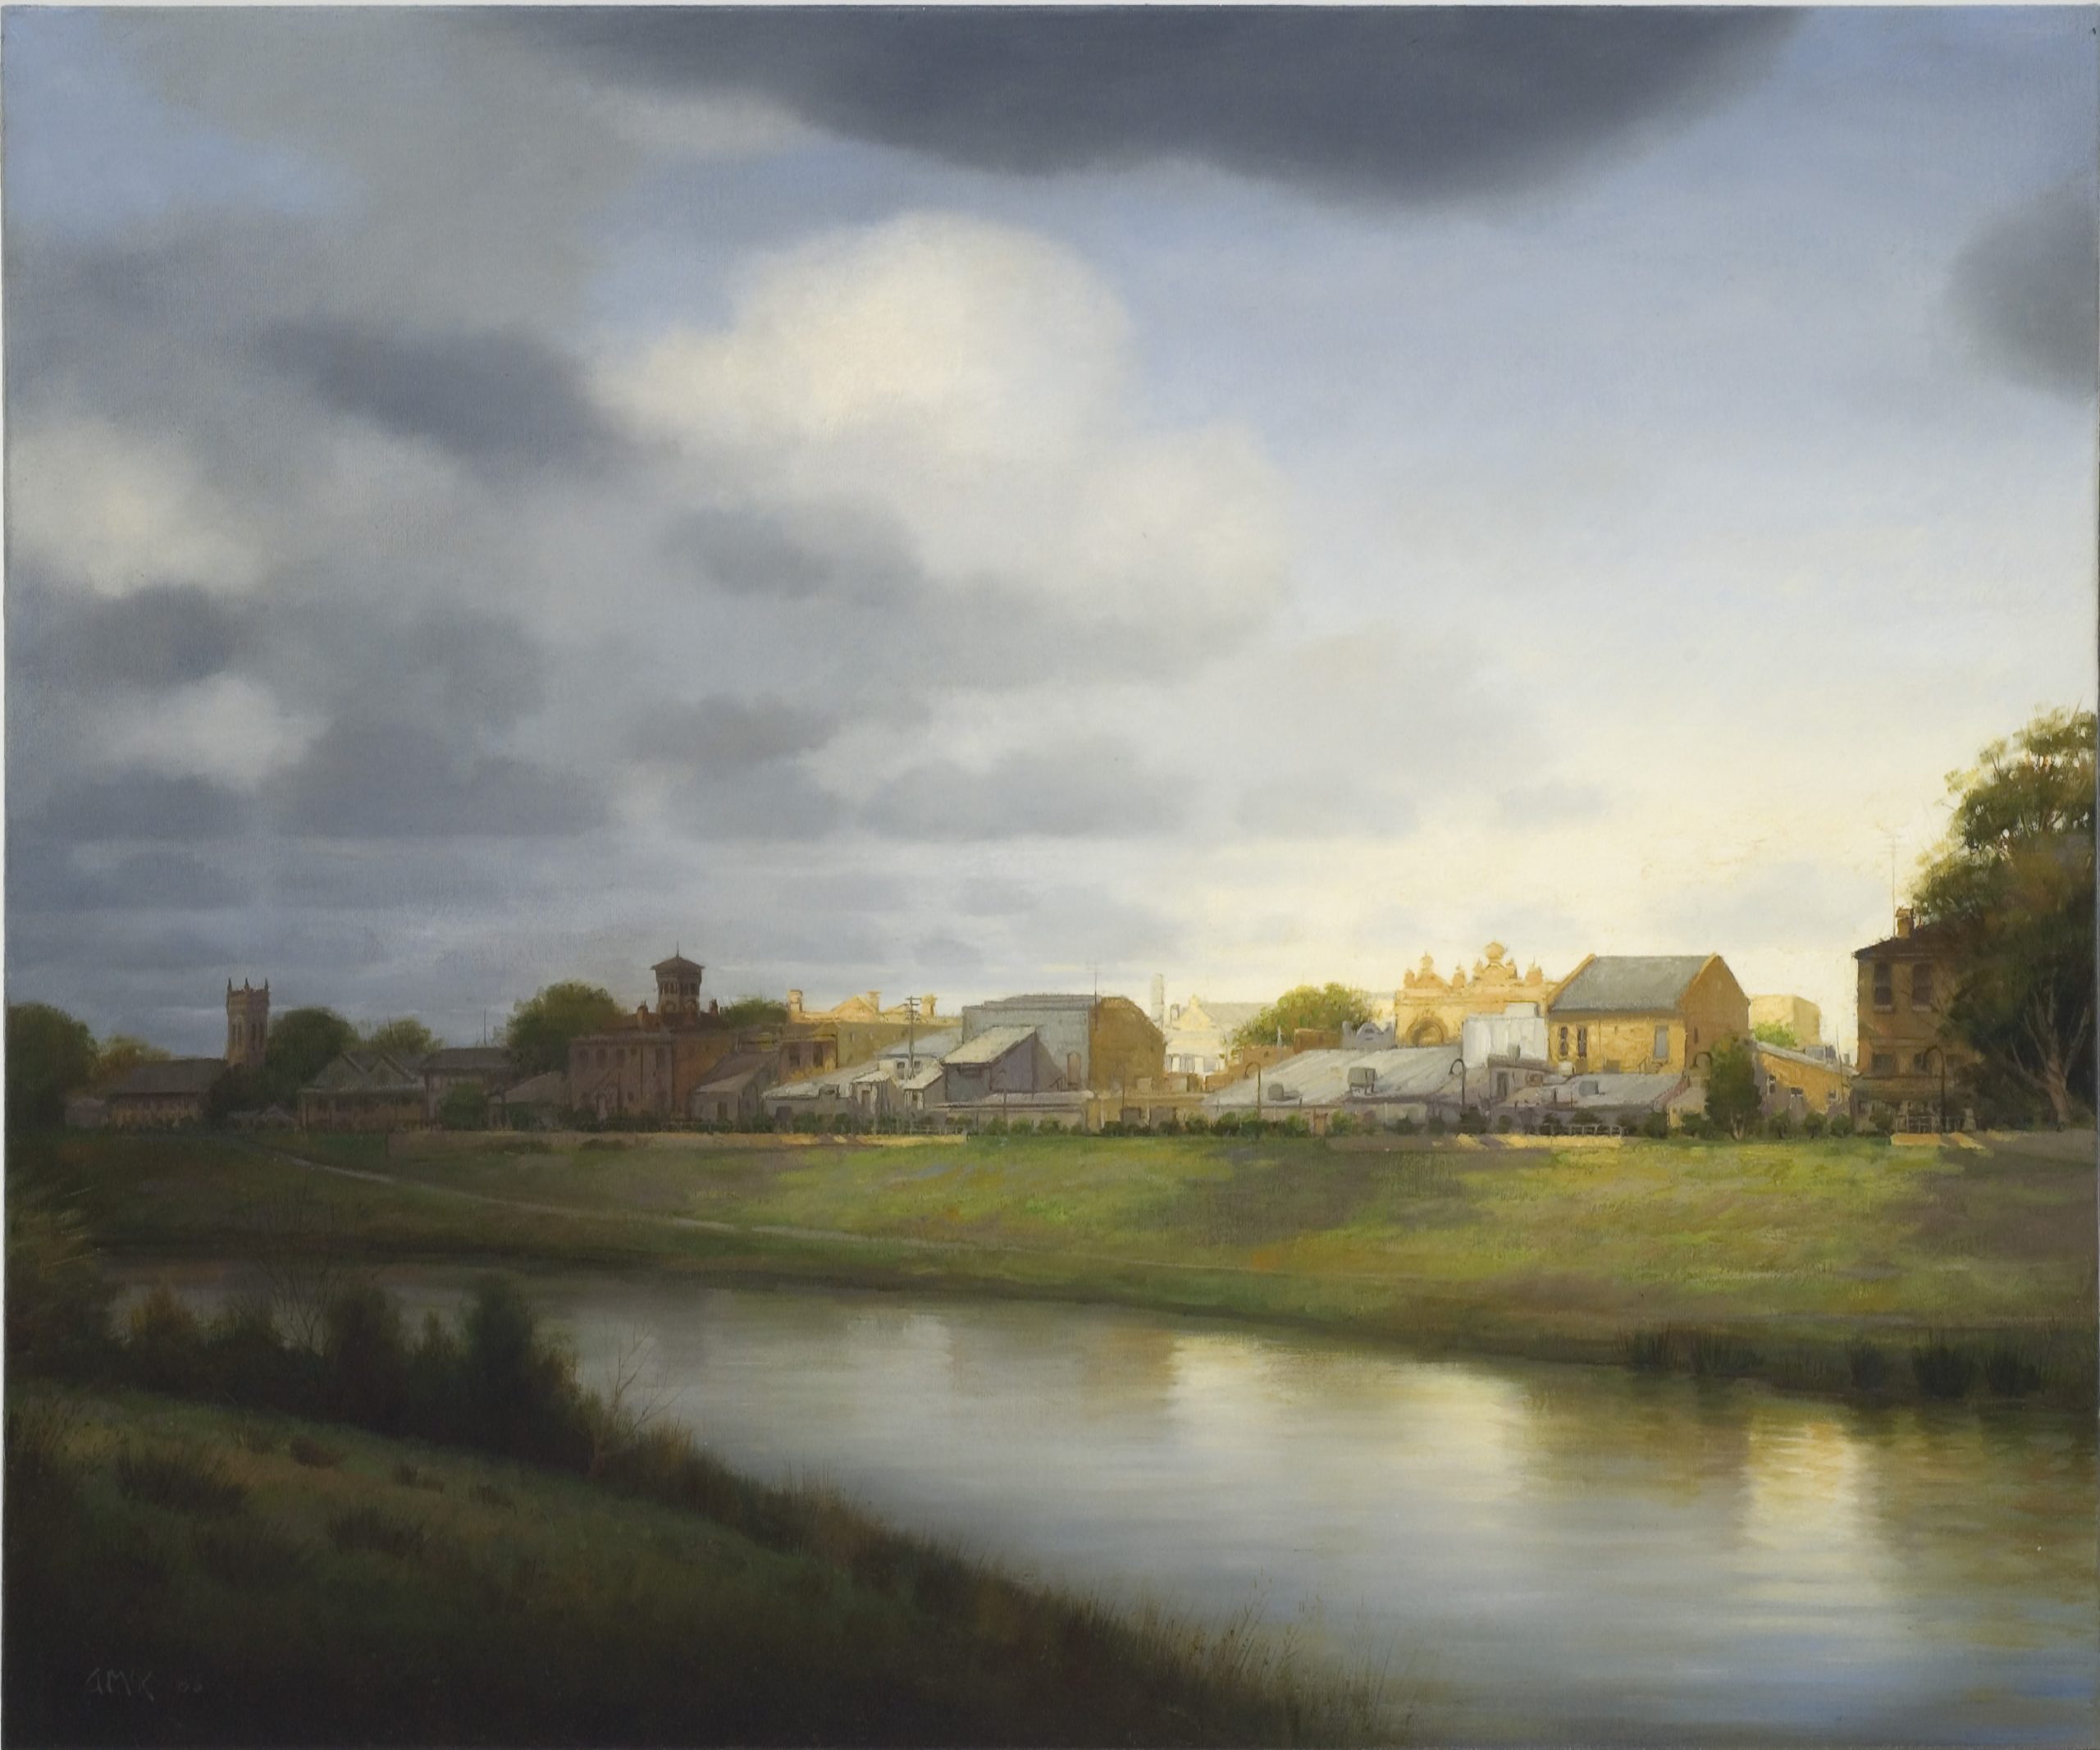 a warm, soft painting of a town in the dappled light from a crack in the cloudy sky, it sits beside a grass-lined river which reflects the sky in a dreamy way